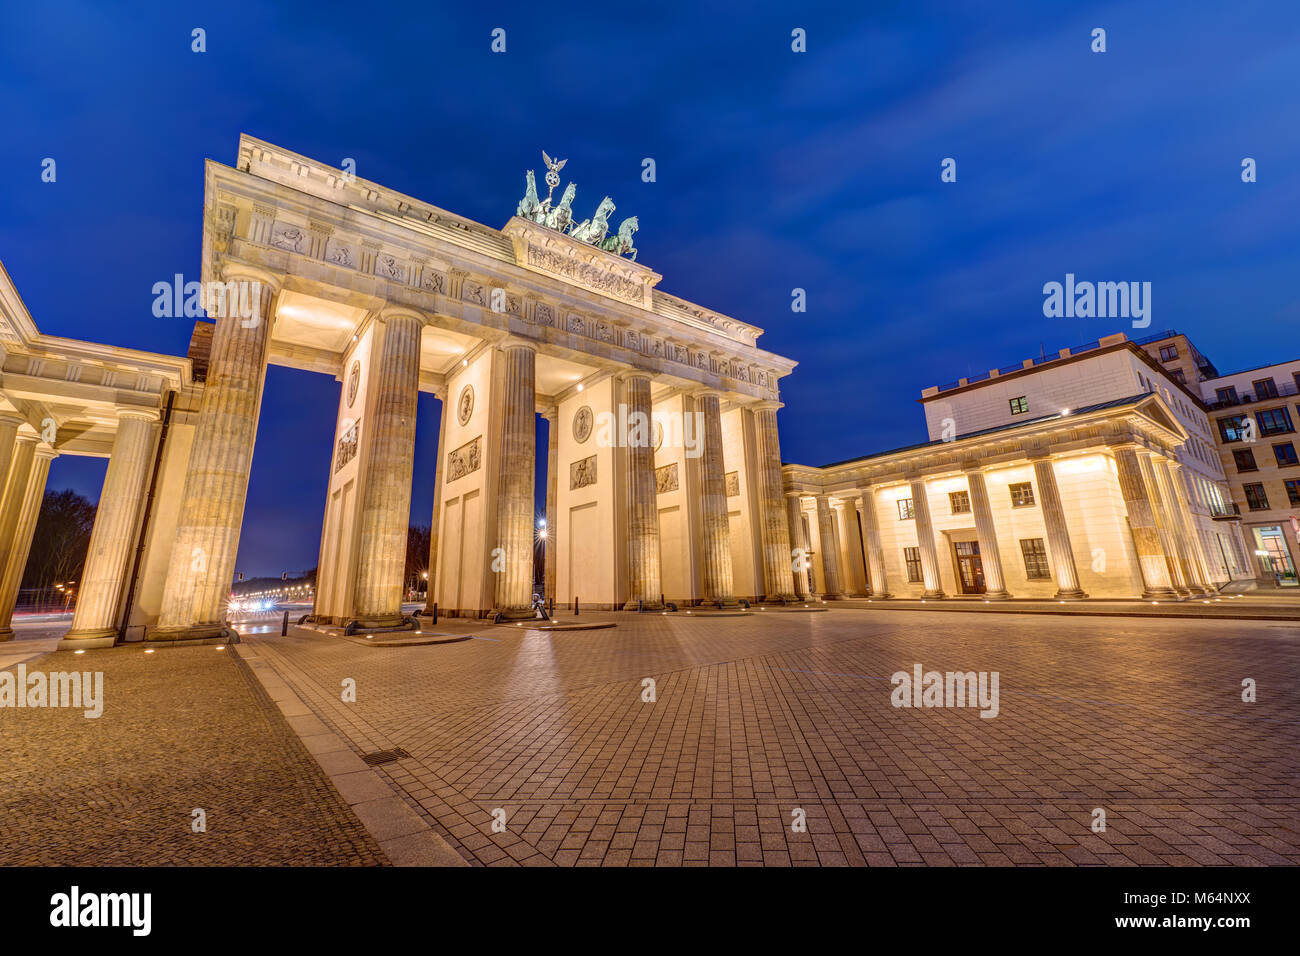 Night view of the famous Brandenburg Gate in Berlin, Germany Stock Photo